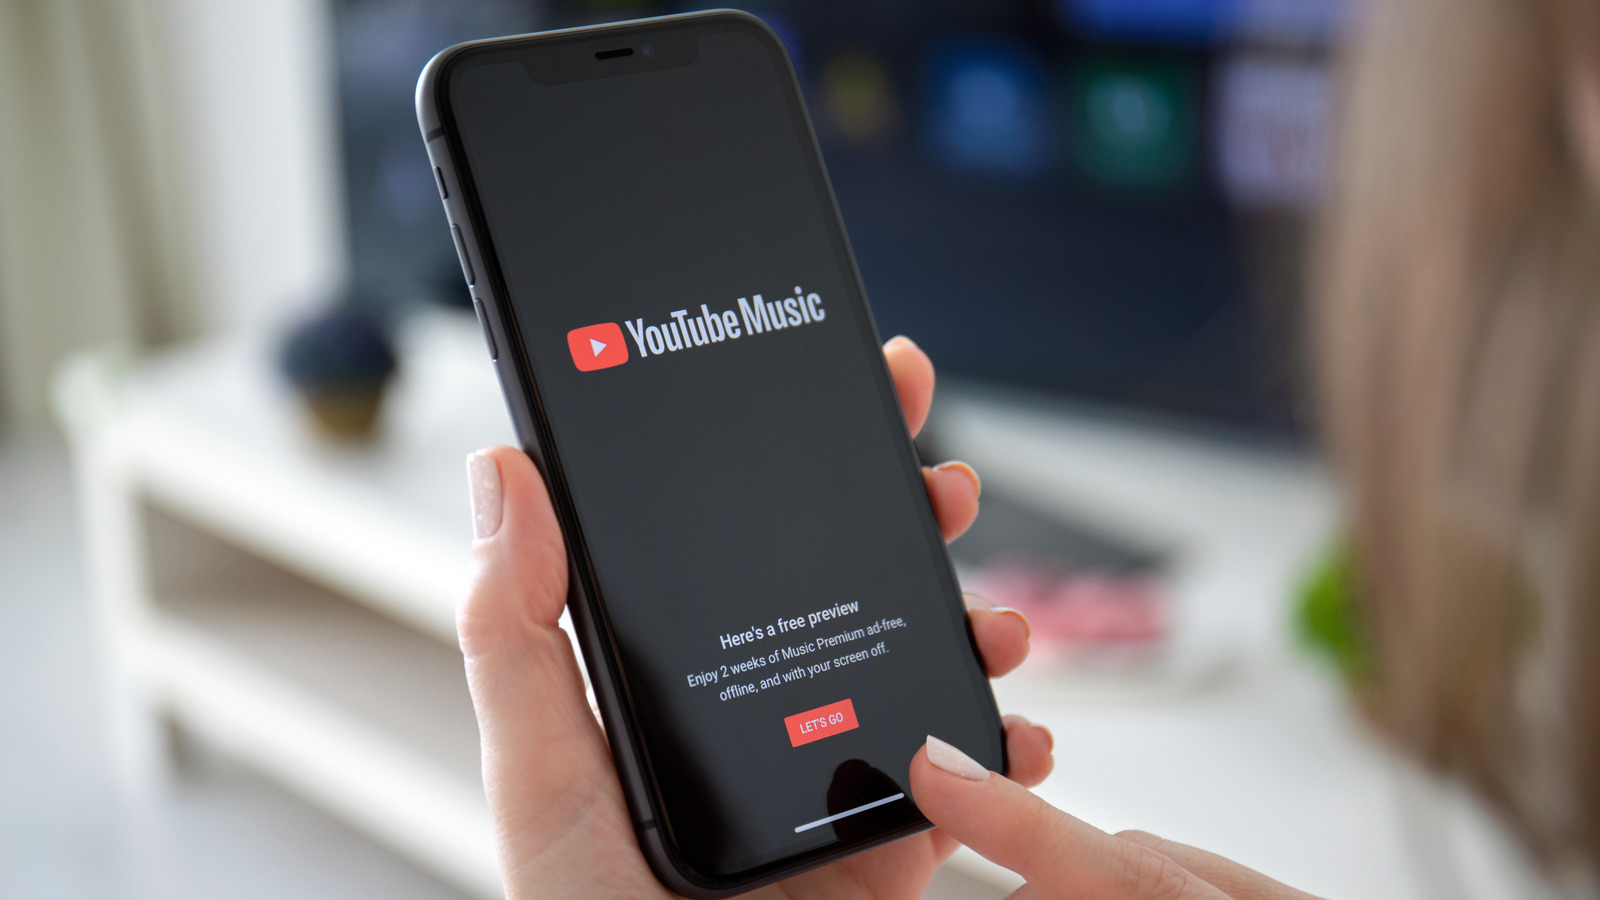 Youtube Music Seems To Be Rolling Out Real Time Lyrics To Android Users